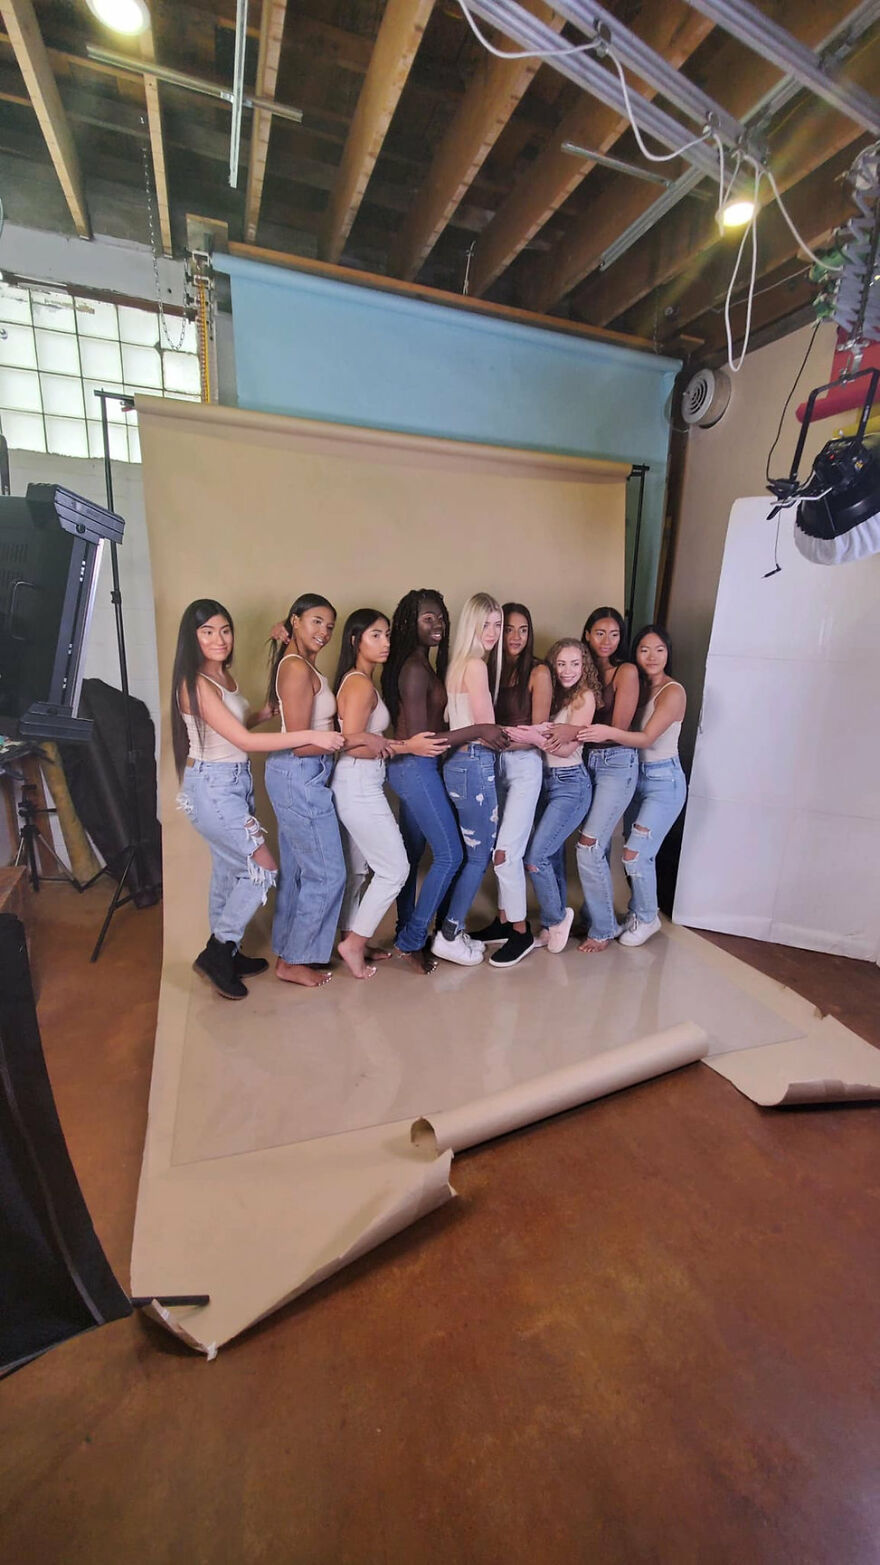 I fulfilled my dream as a photographer and photographed 10 different girls with 10 different skin tones all together for a project titled Shades of Beauty 625e992c642e5 880